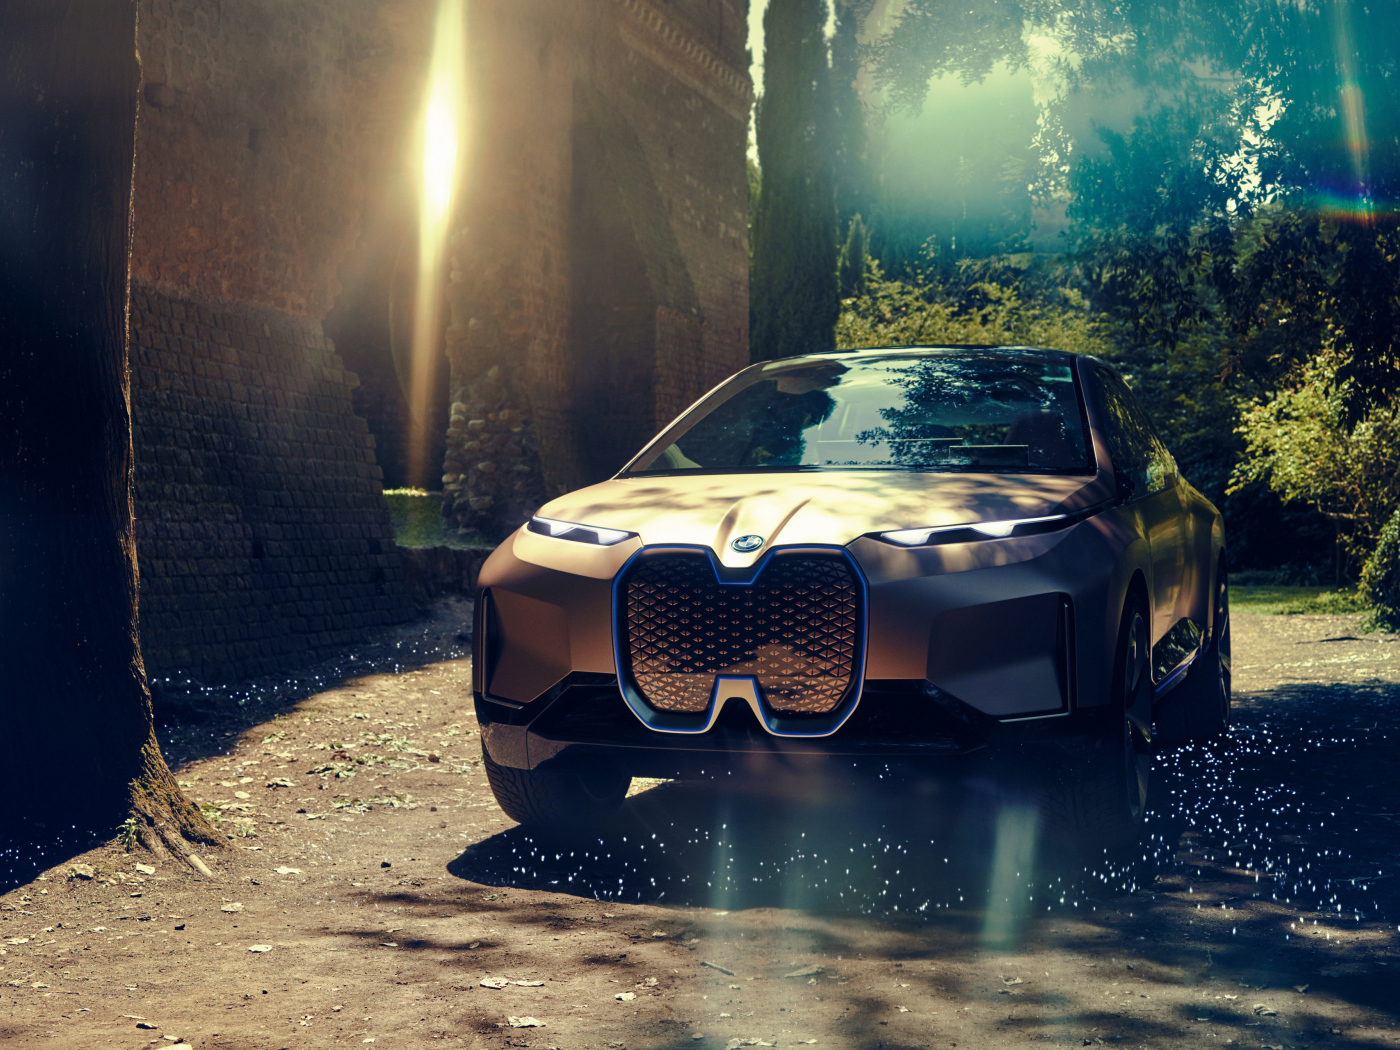 BMW Vision iNEXT SUV rides through the forest